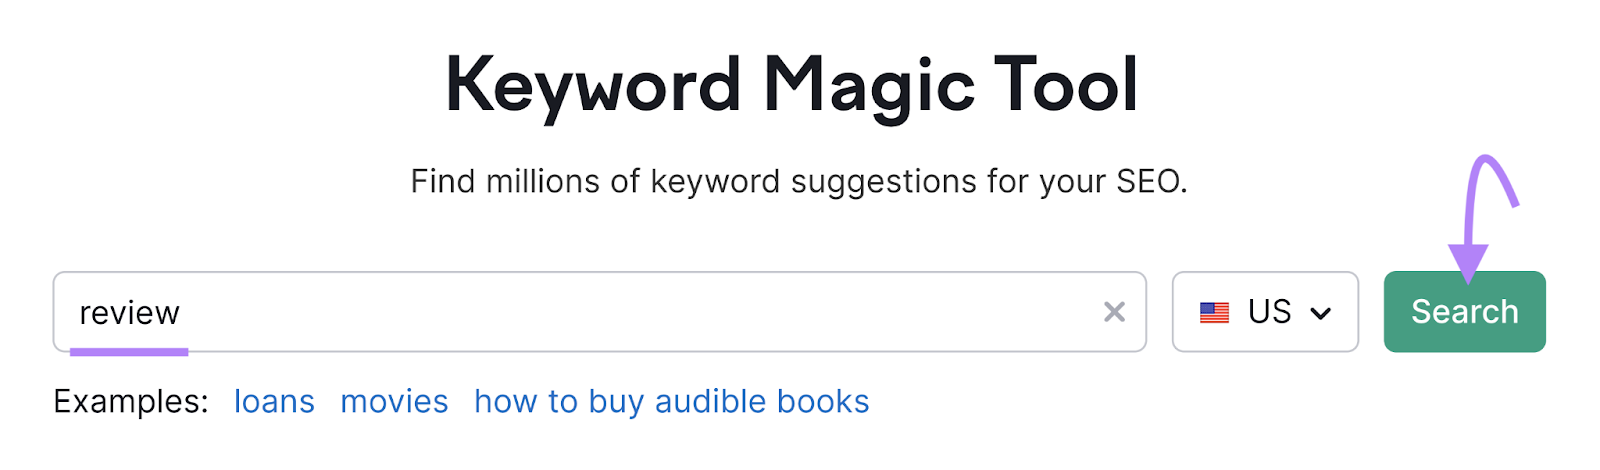 "review" seed keyword entered into the Keyword Magic Tool search bar